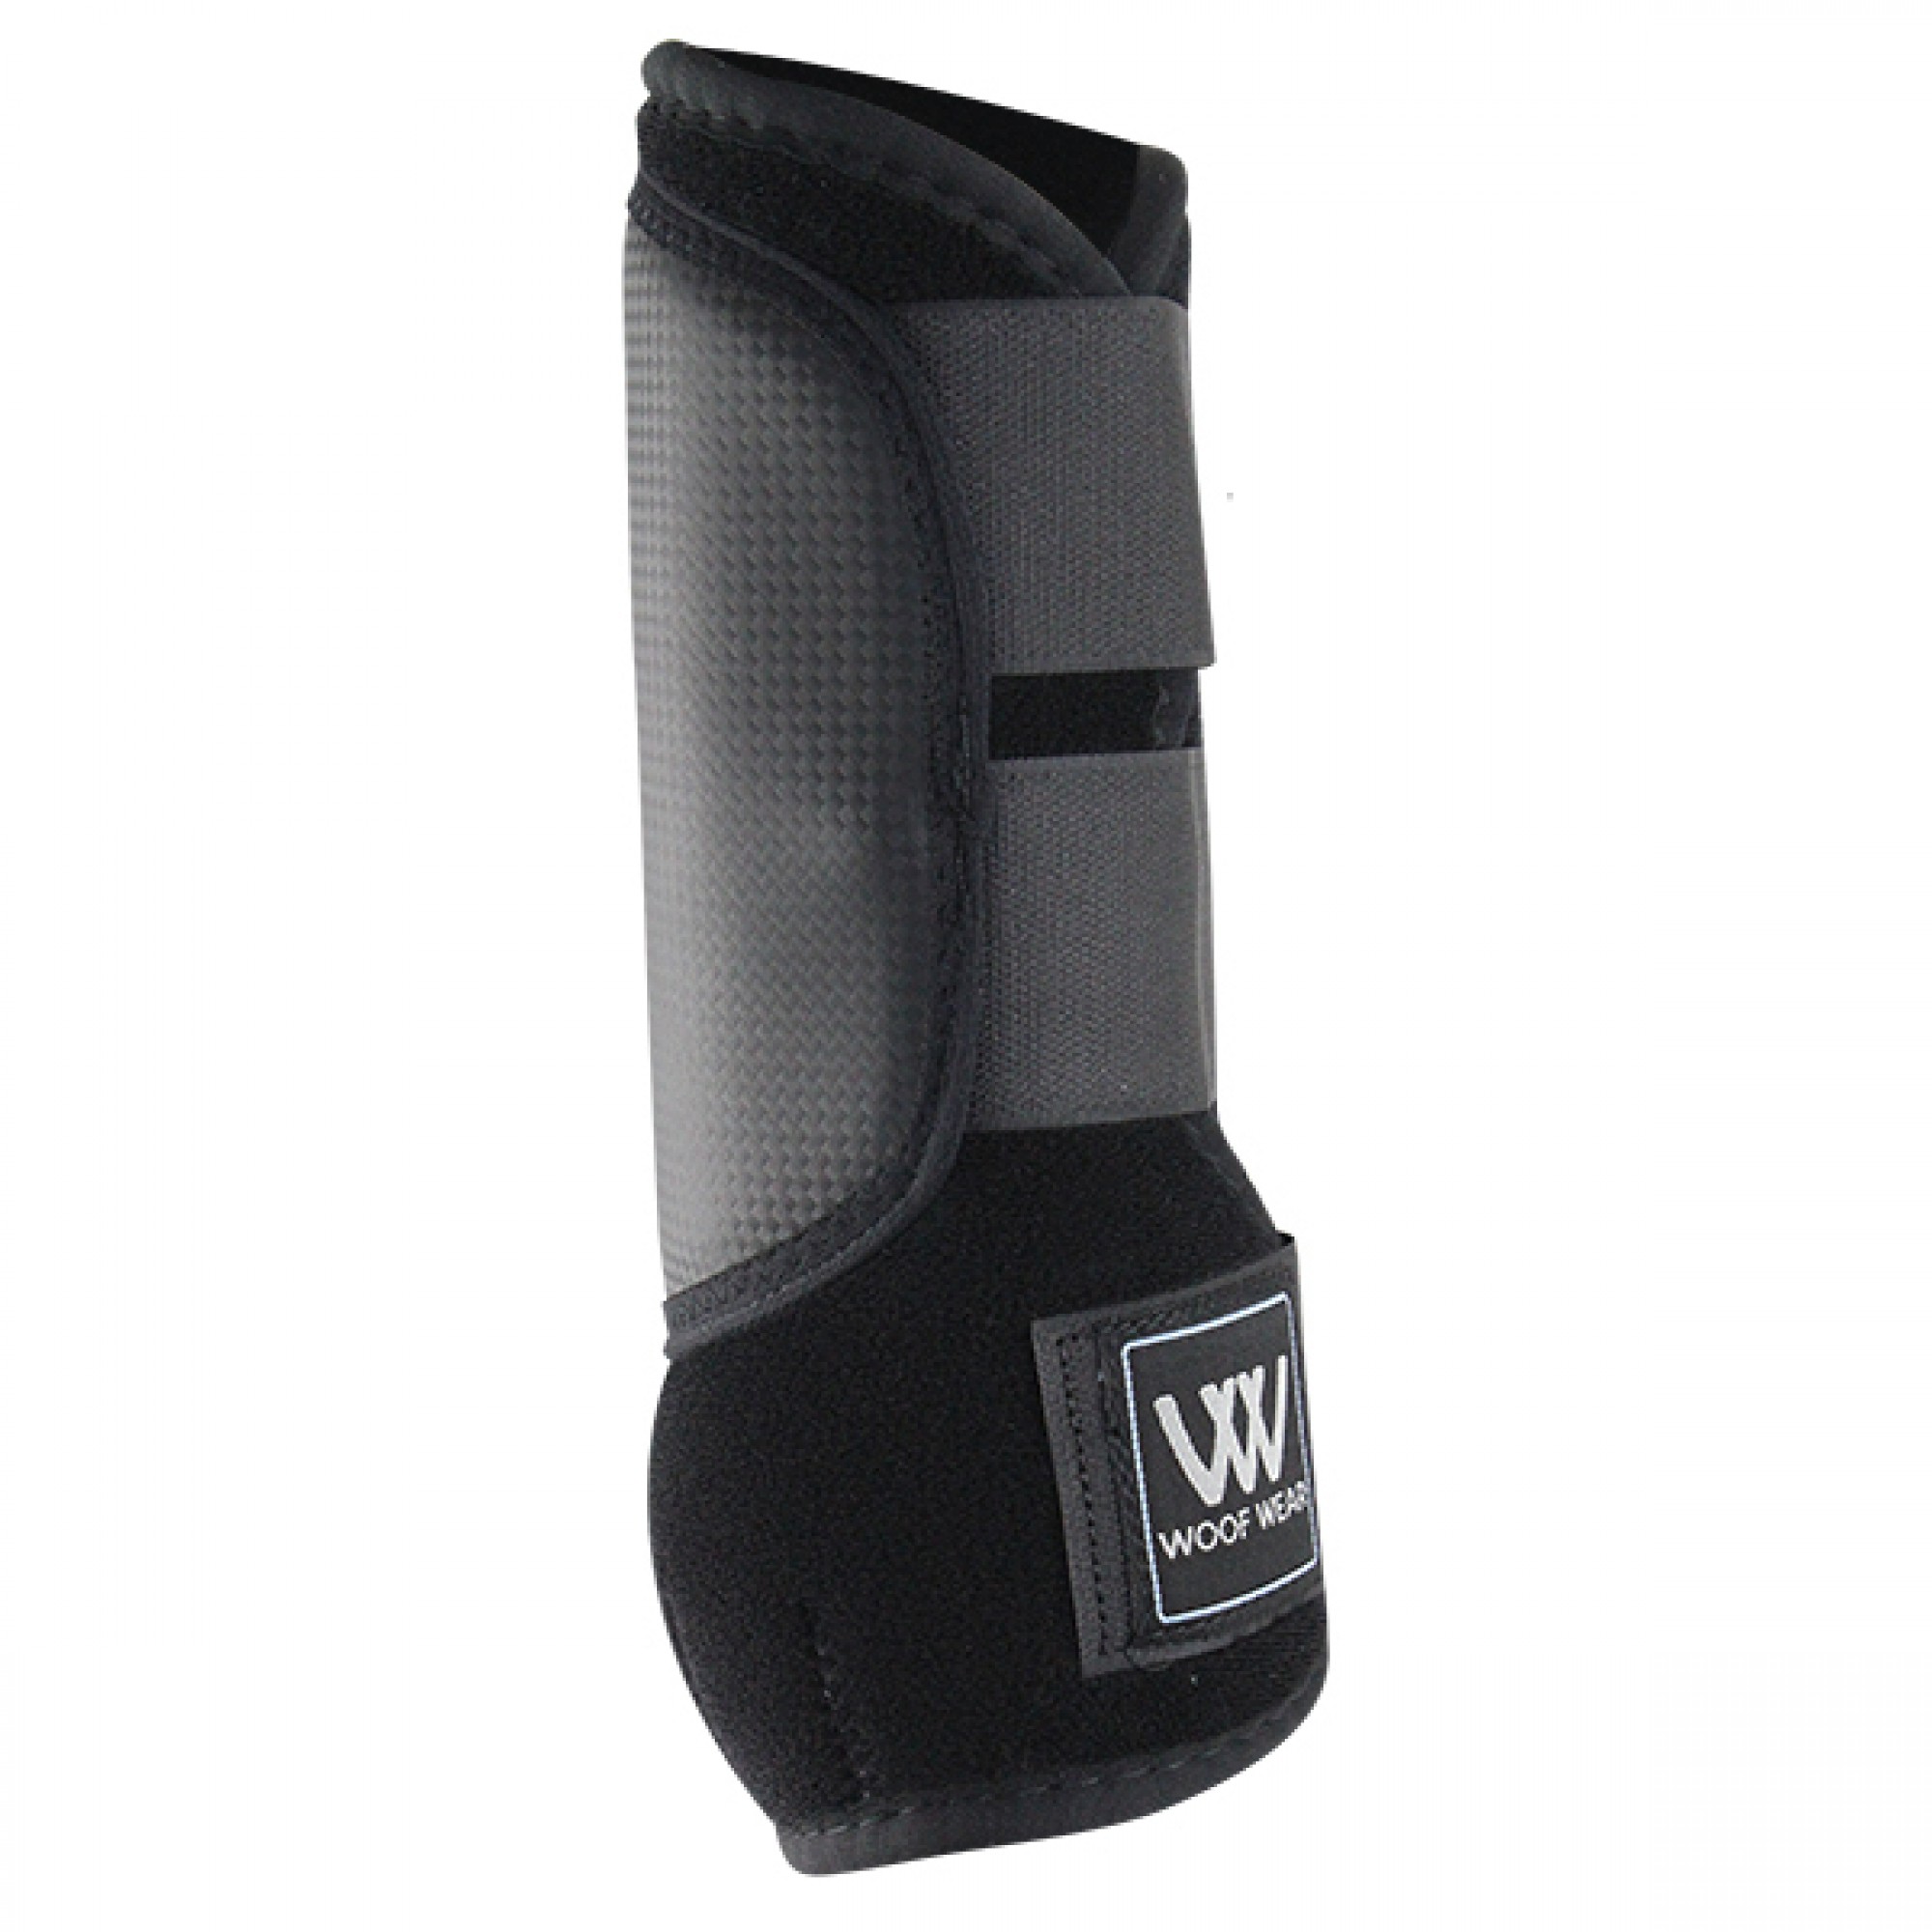 Cross country fetlock boots